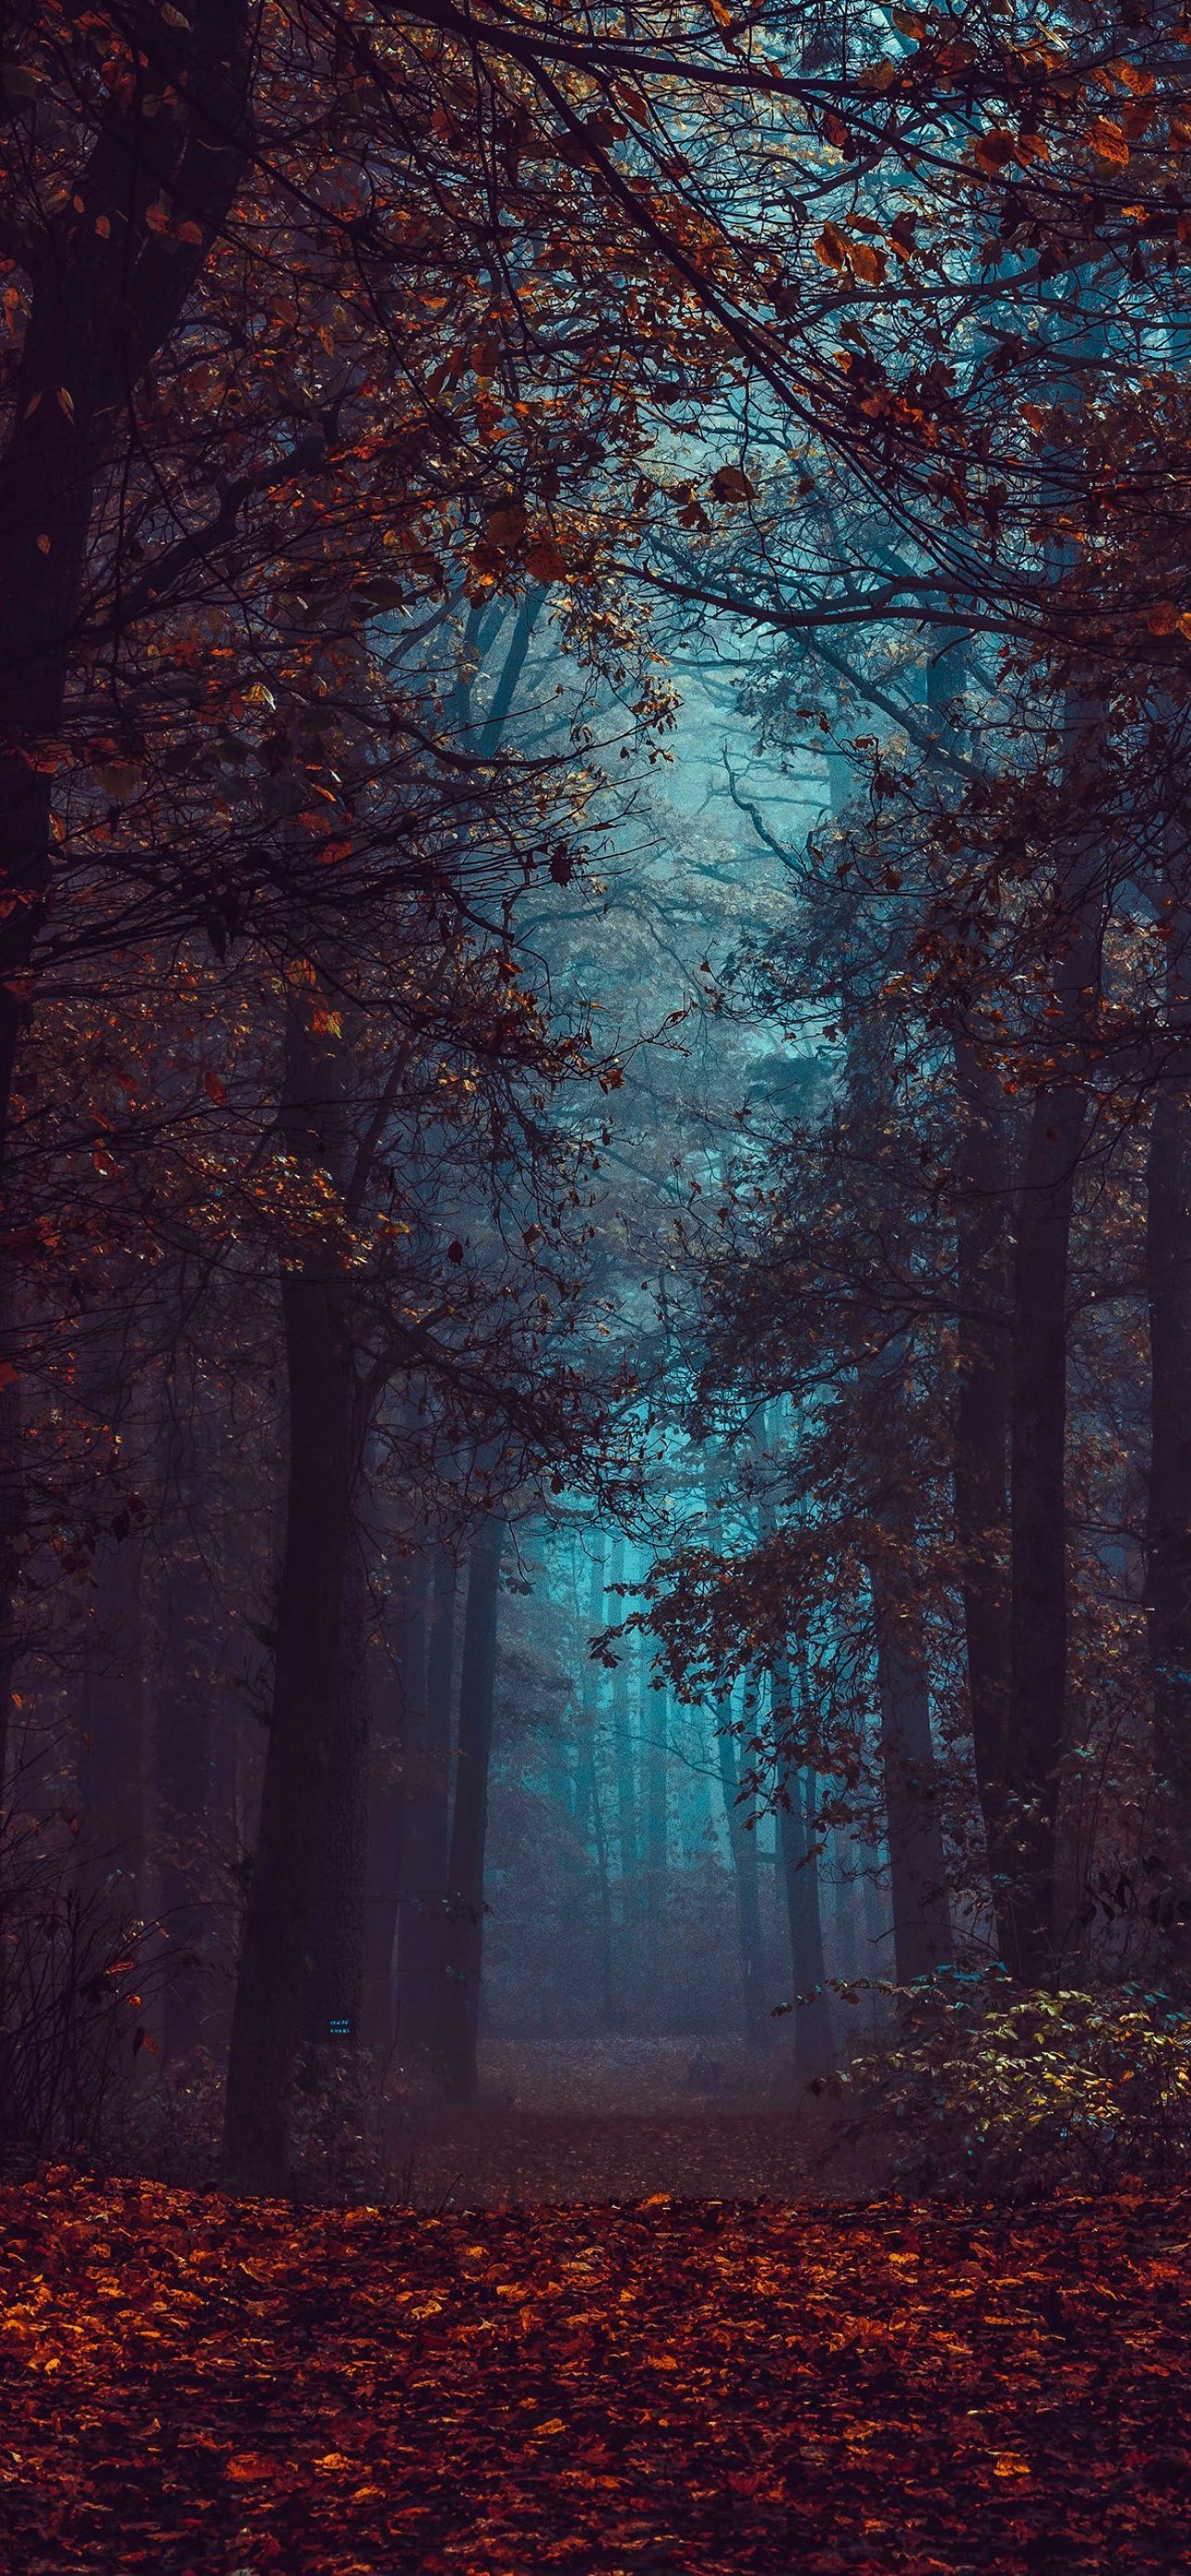 A forest with trees and leaves during a foggy day - Fall, forest, fog